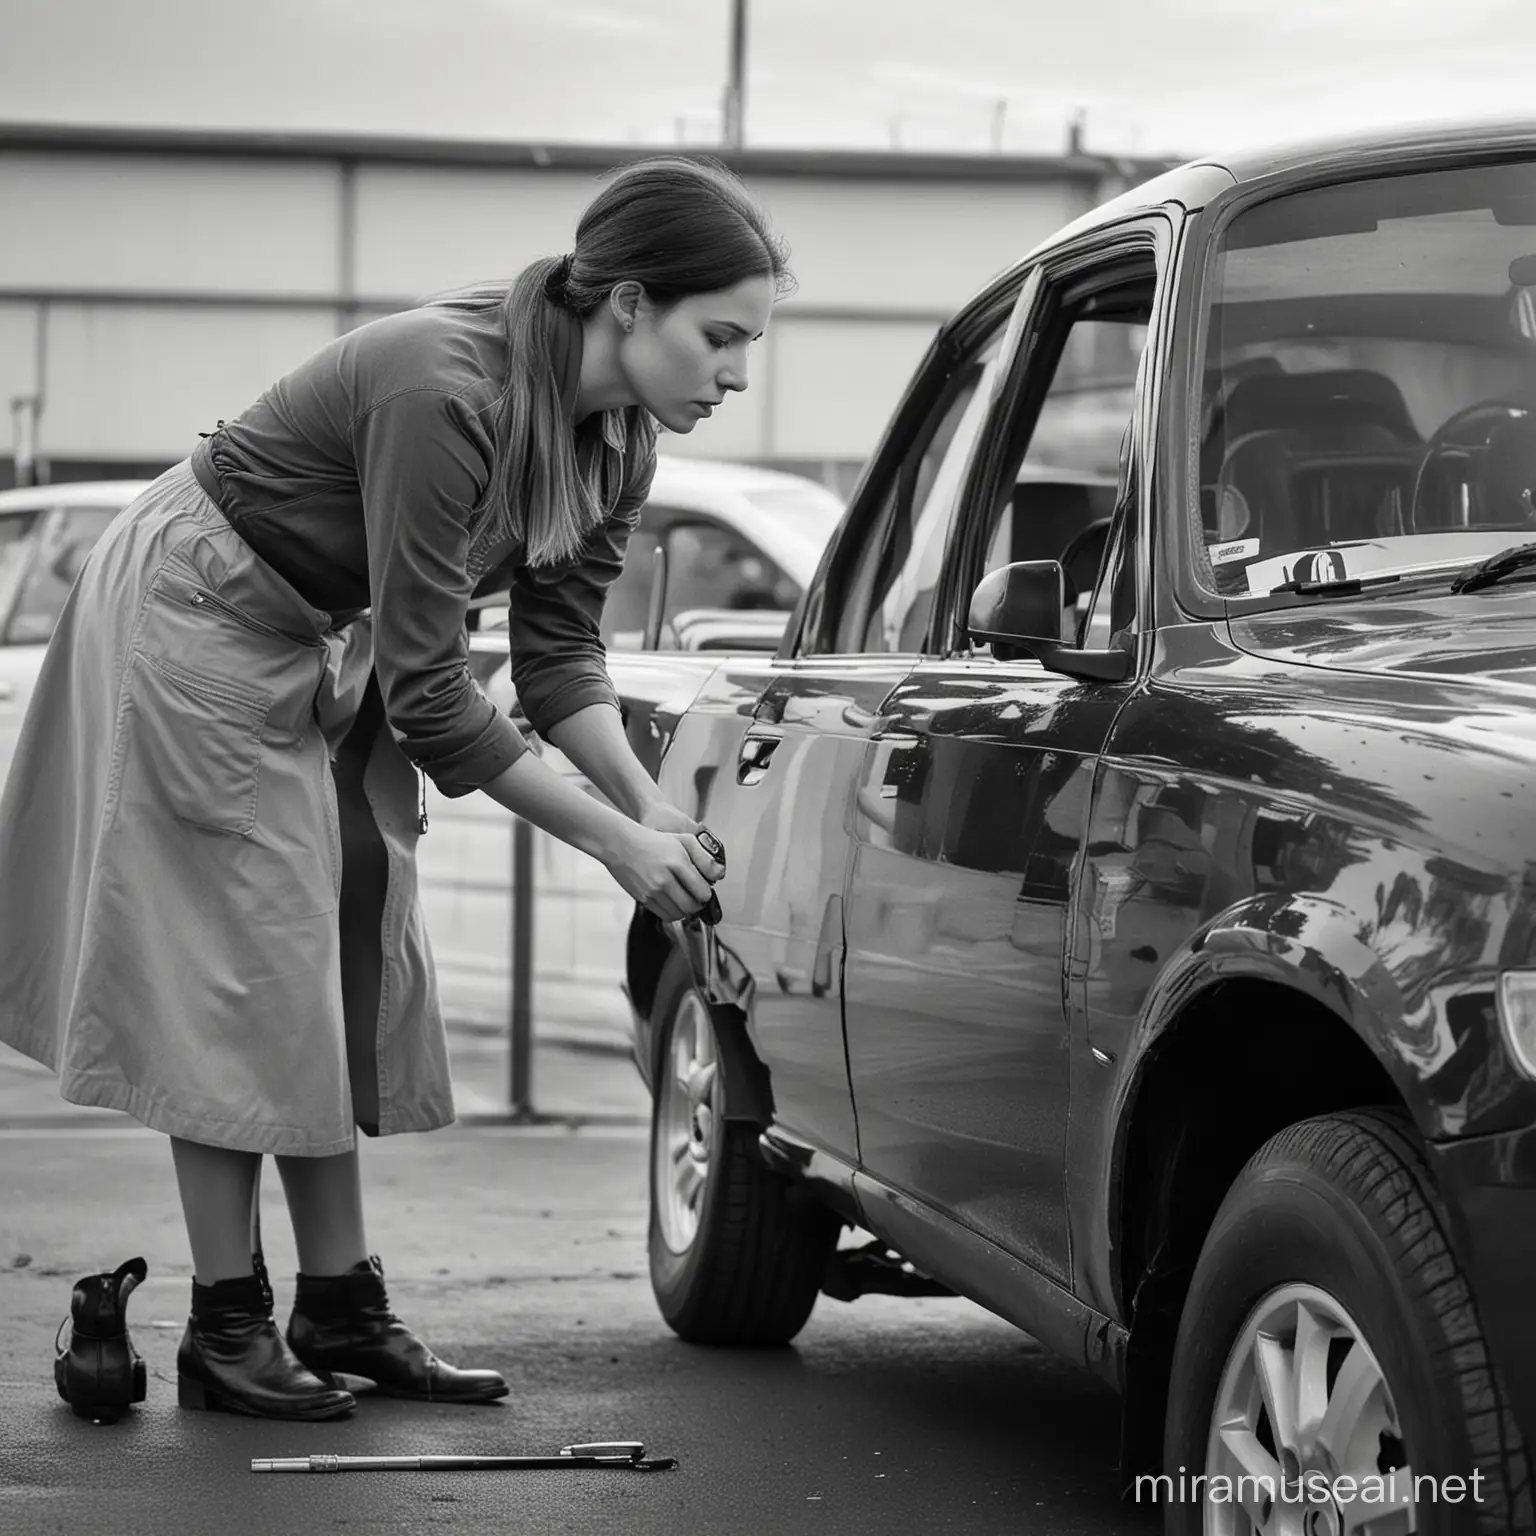 a female fixing a car, the car and the female should be visible. The picture should be easy to see if its printed black and white

